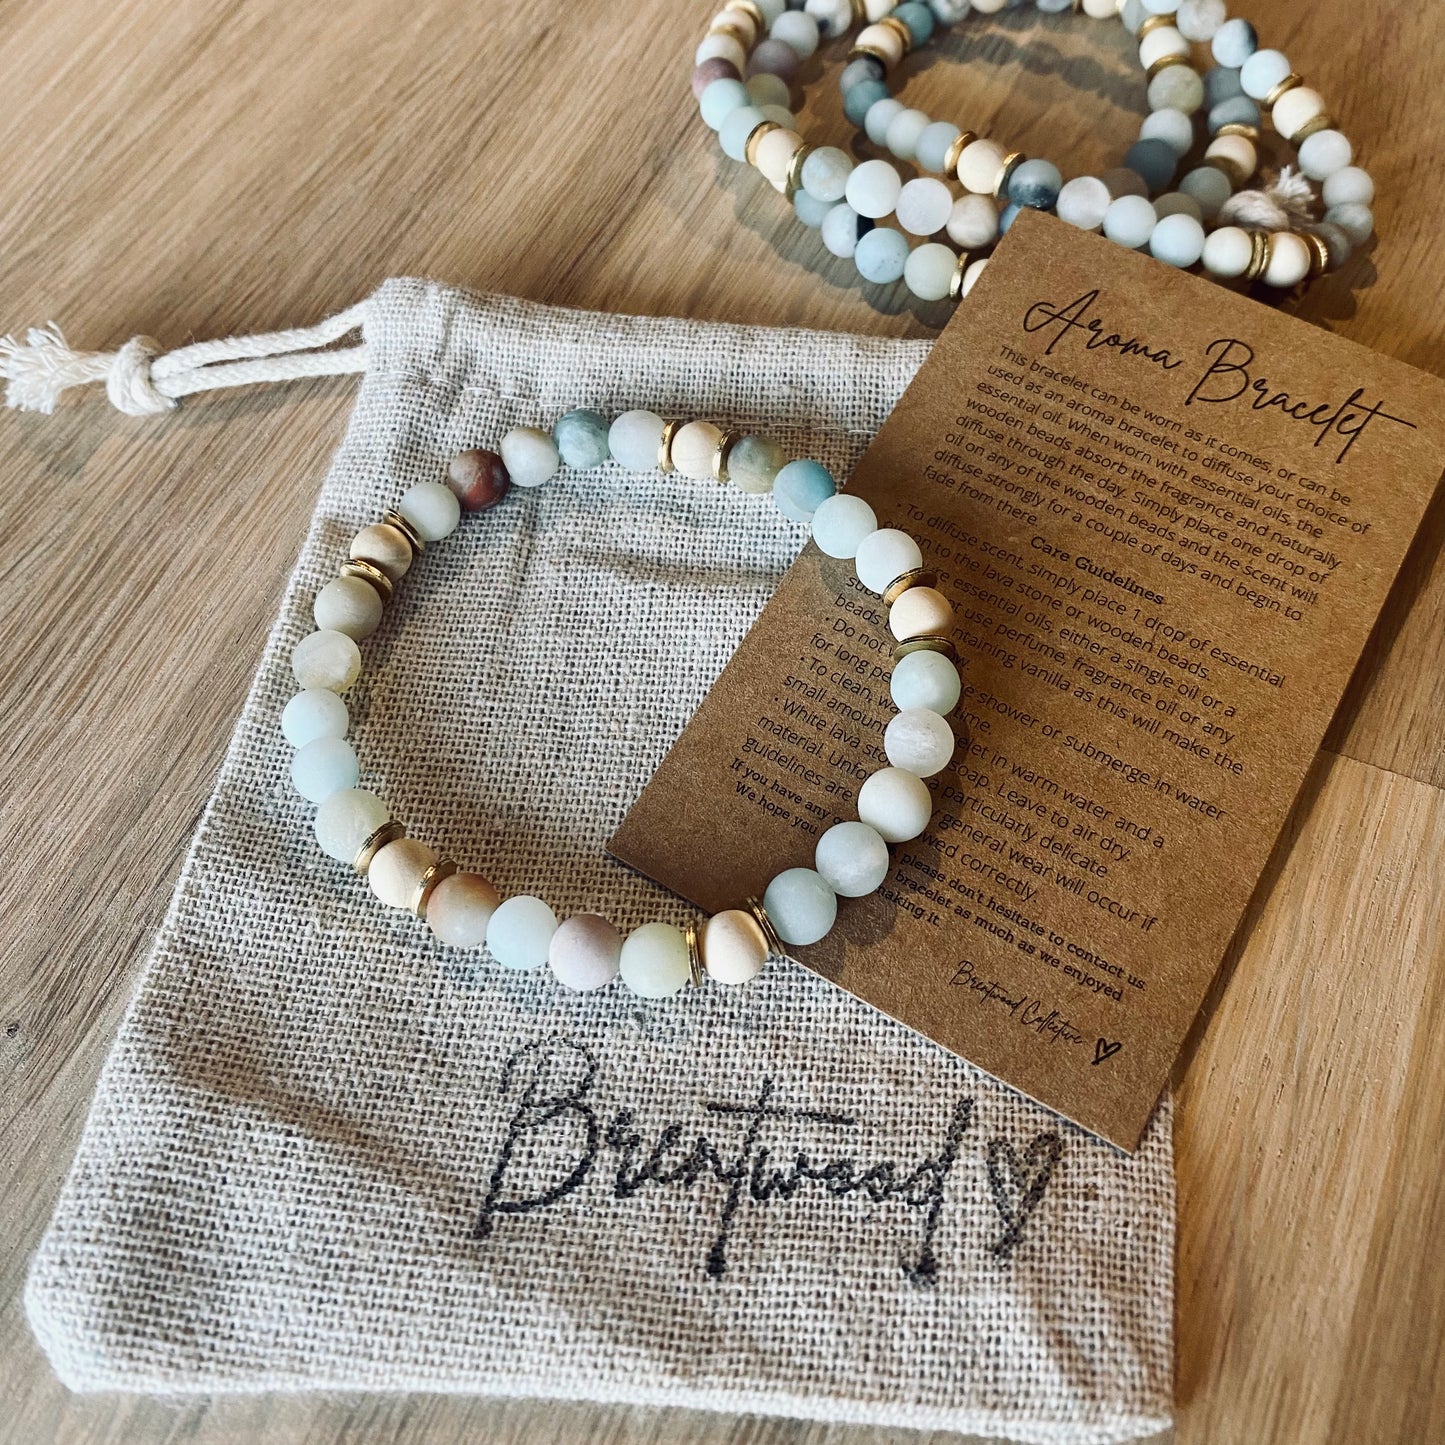 Amazonite aroma bracelet/diffuser bracelet made from 6mm amazonite & natural white wood beads with brass heishi disc embellishments. Laid on cloth pouch/drawstring bag stamped with “Brentwood” and an aroma bracelet information and care card on kraft brown card. 